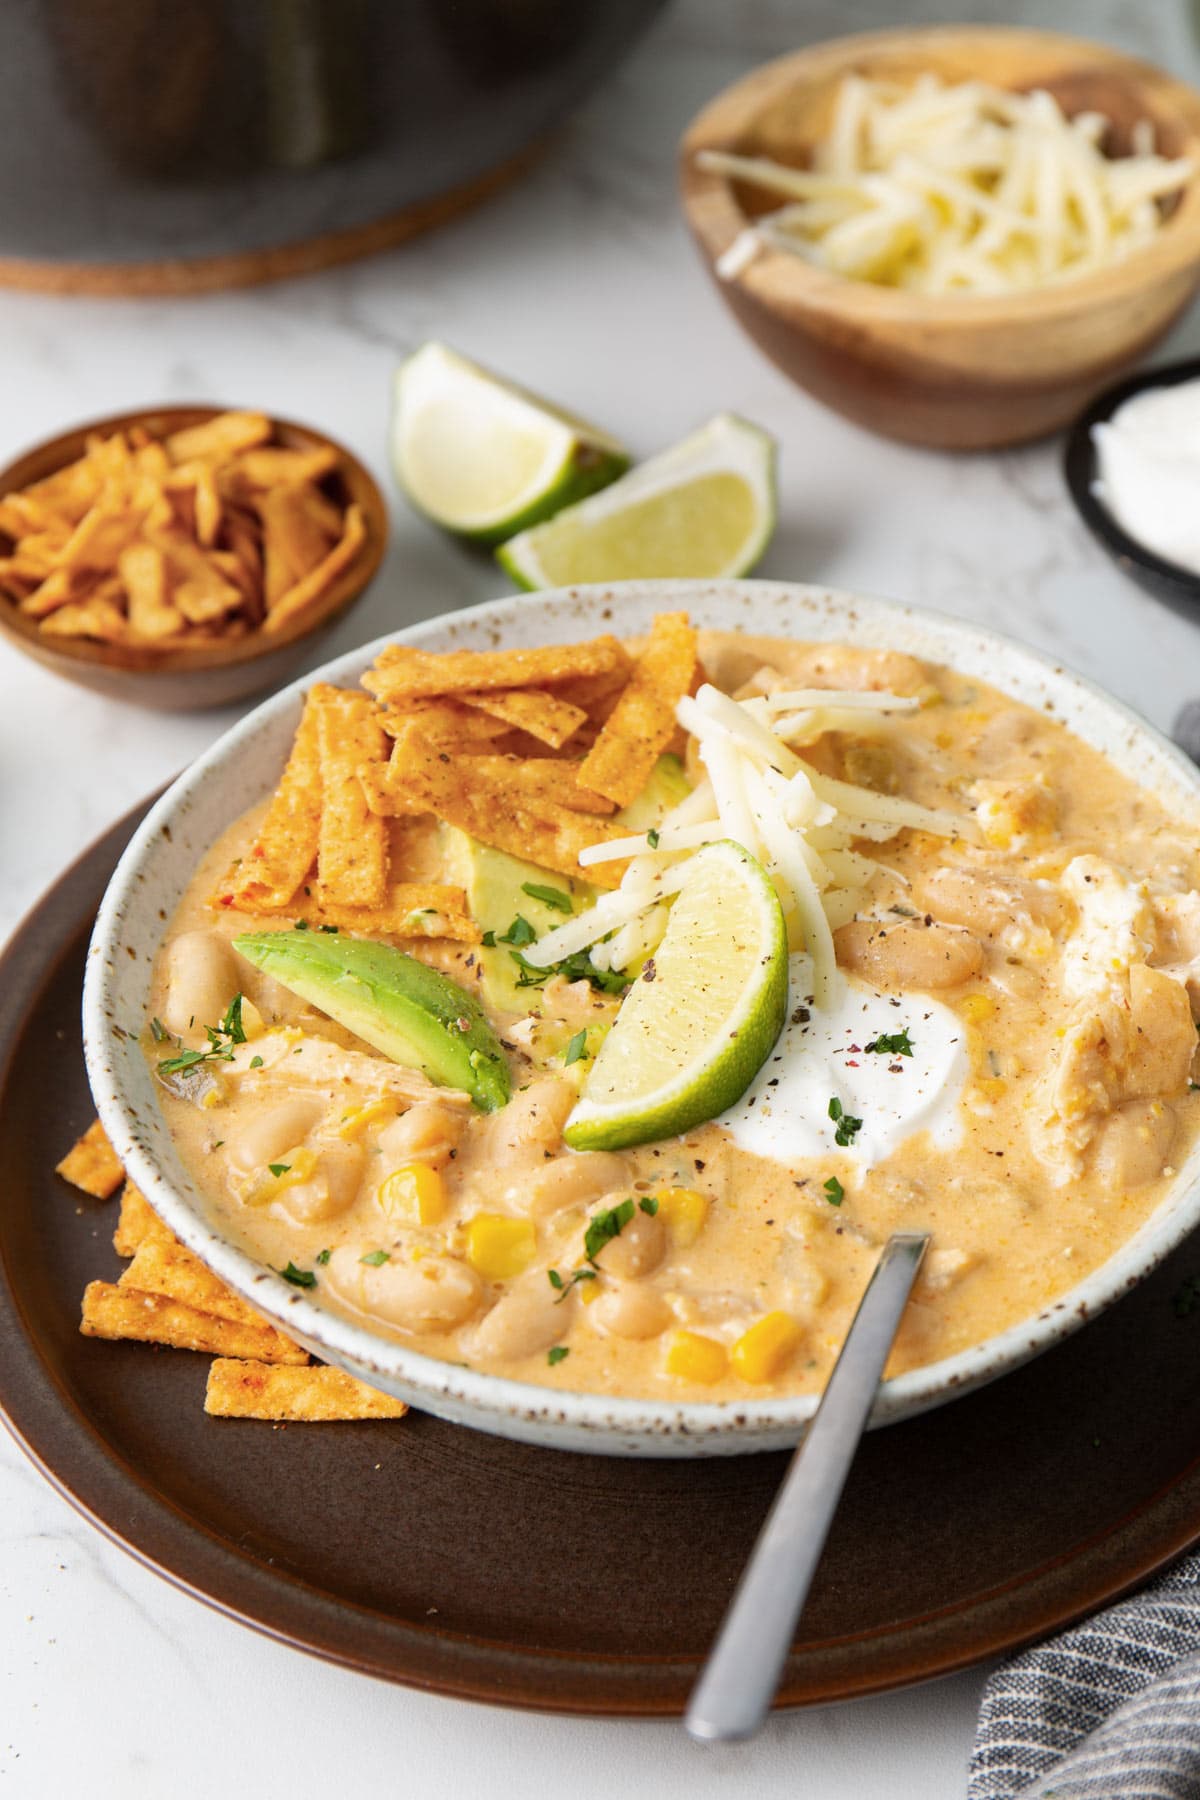 A big bowl of white chicken chili topped with tortilla strips, shredded cheese, sliced avocado, sour cream, lime wedges and chopped cilantro.